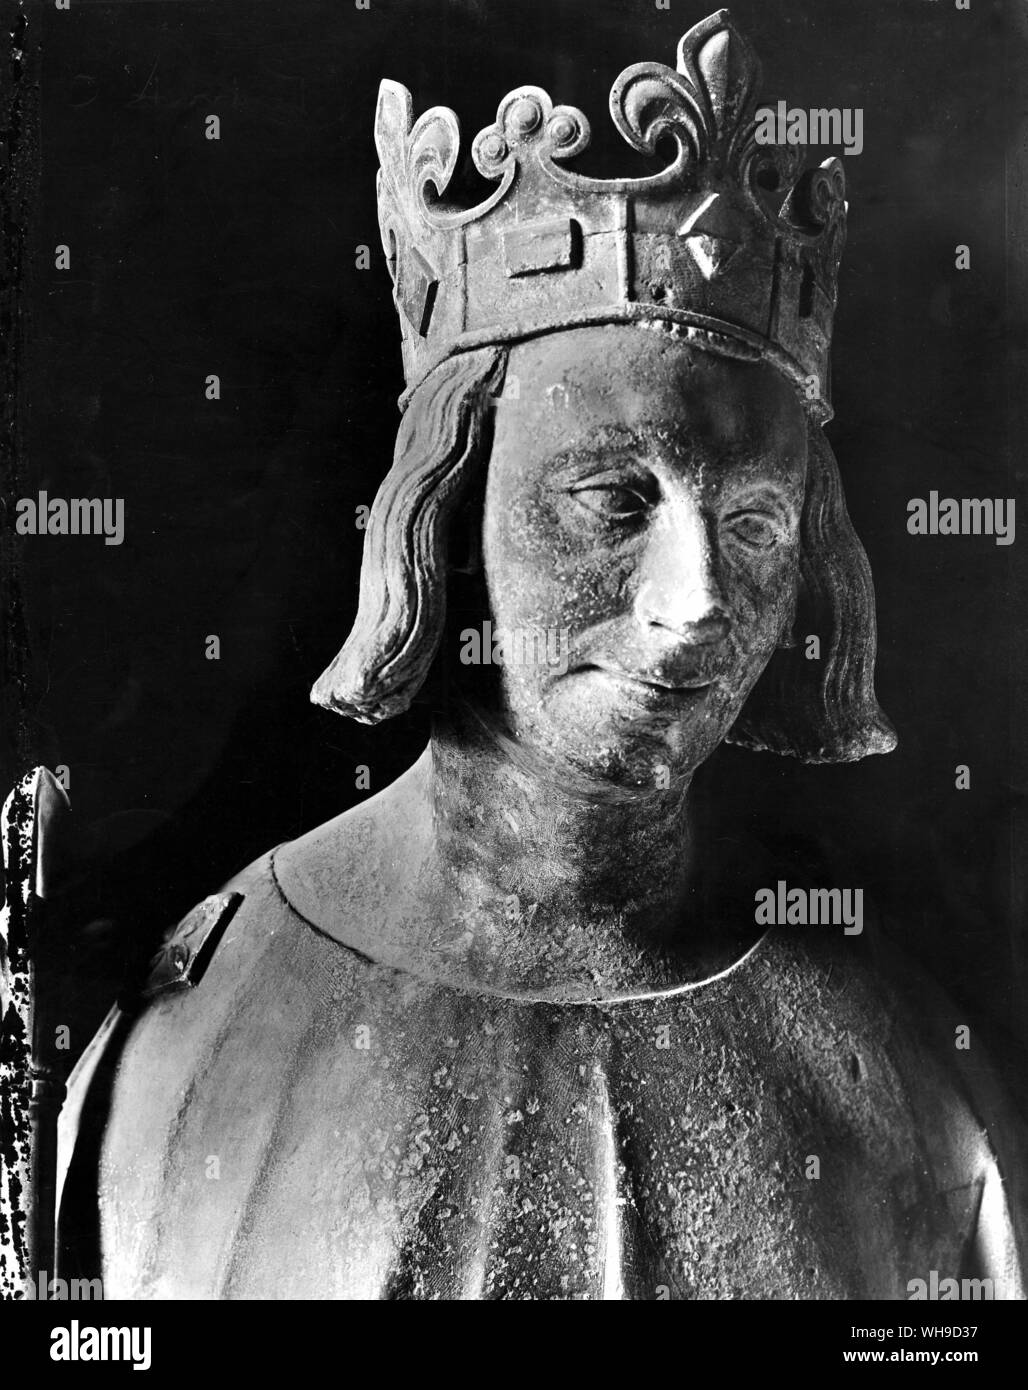 Charles (V) The Wise (1337-1380). King of France from 1364. He was regent during the captivity of his father, John II, in England 1356-1360, and became king on John's death. He reconquered nearly all France from England 1369-80. Stock Photo